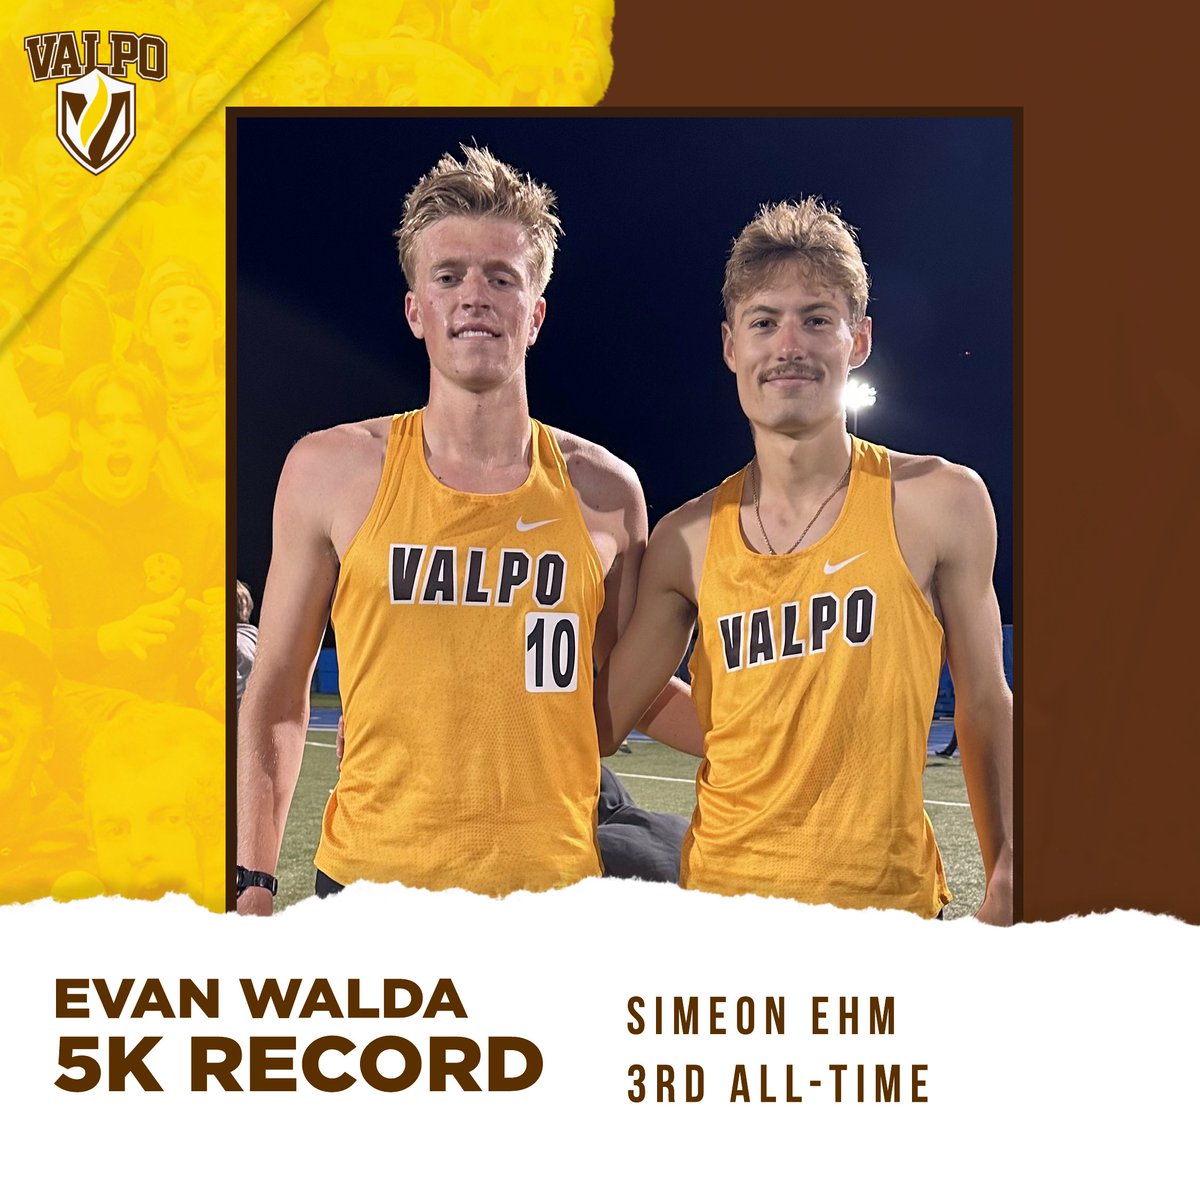 Evan Walda of @ValpoXCTF stopped the clock in 14:14.23 in the 5000, setting a program record on Thursday at GVSU! Teammate Simeon Ehm moved up to third in the program record book with his time of 14:23.64. #GoValpo